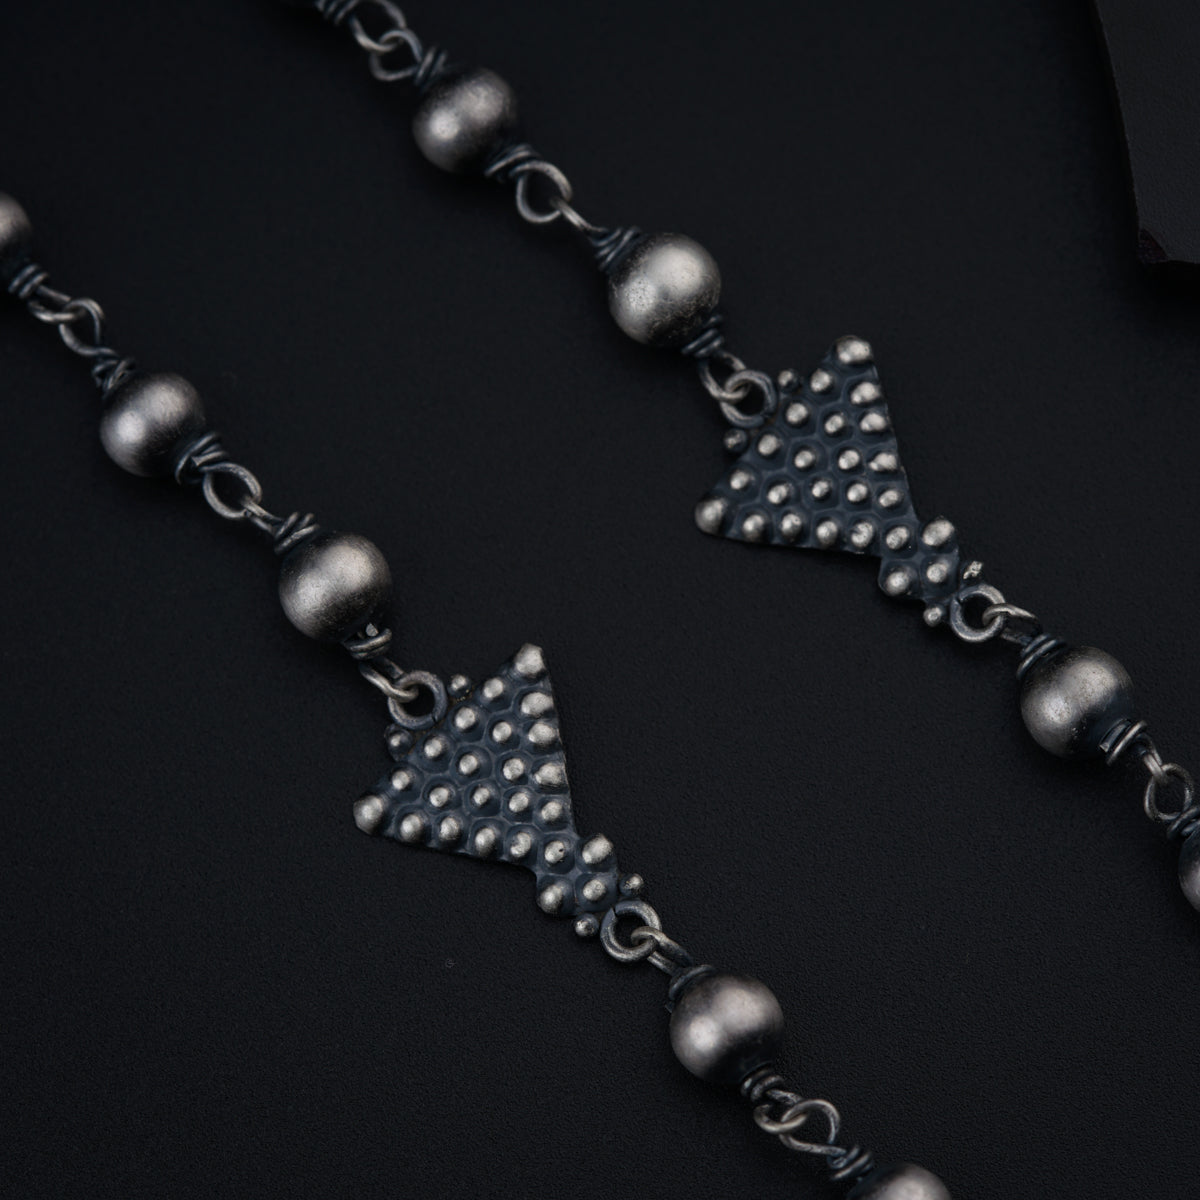 a close up of a necklace with a star on it